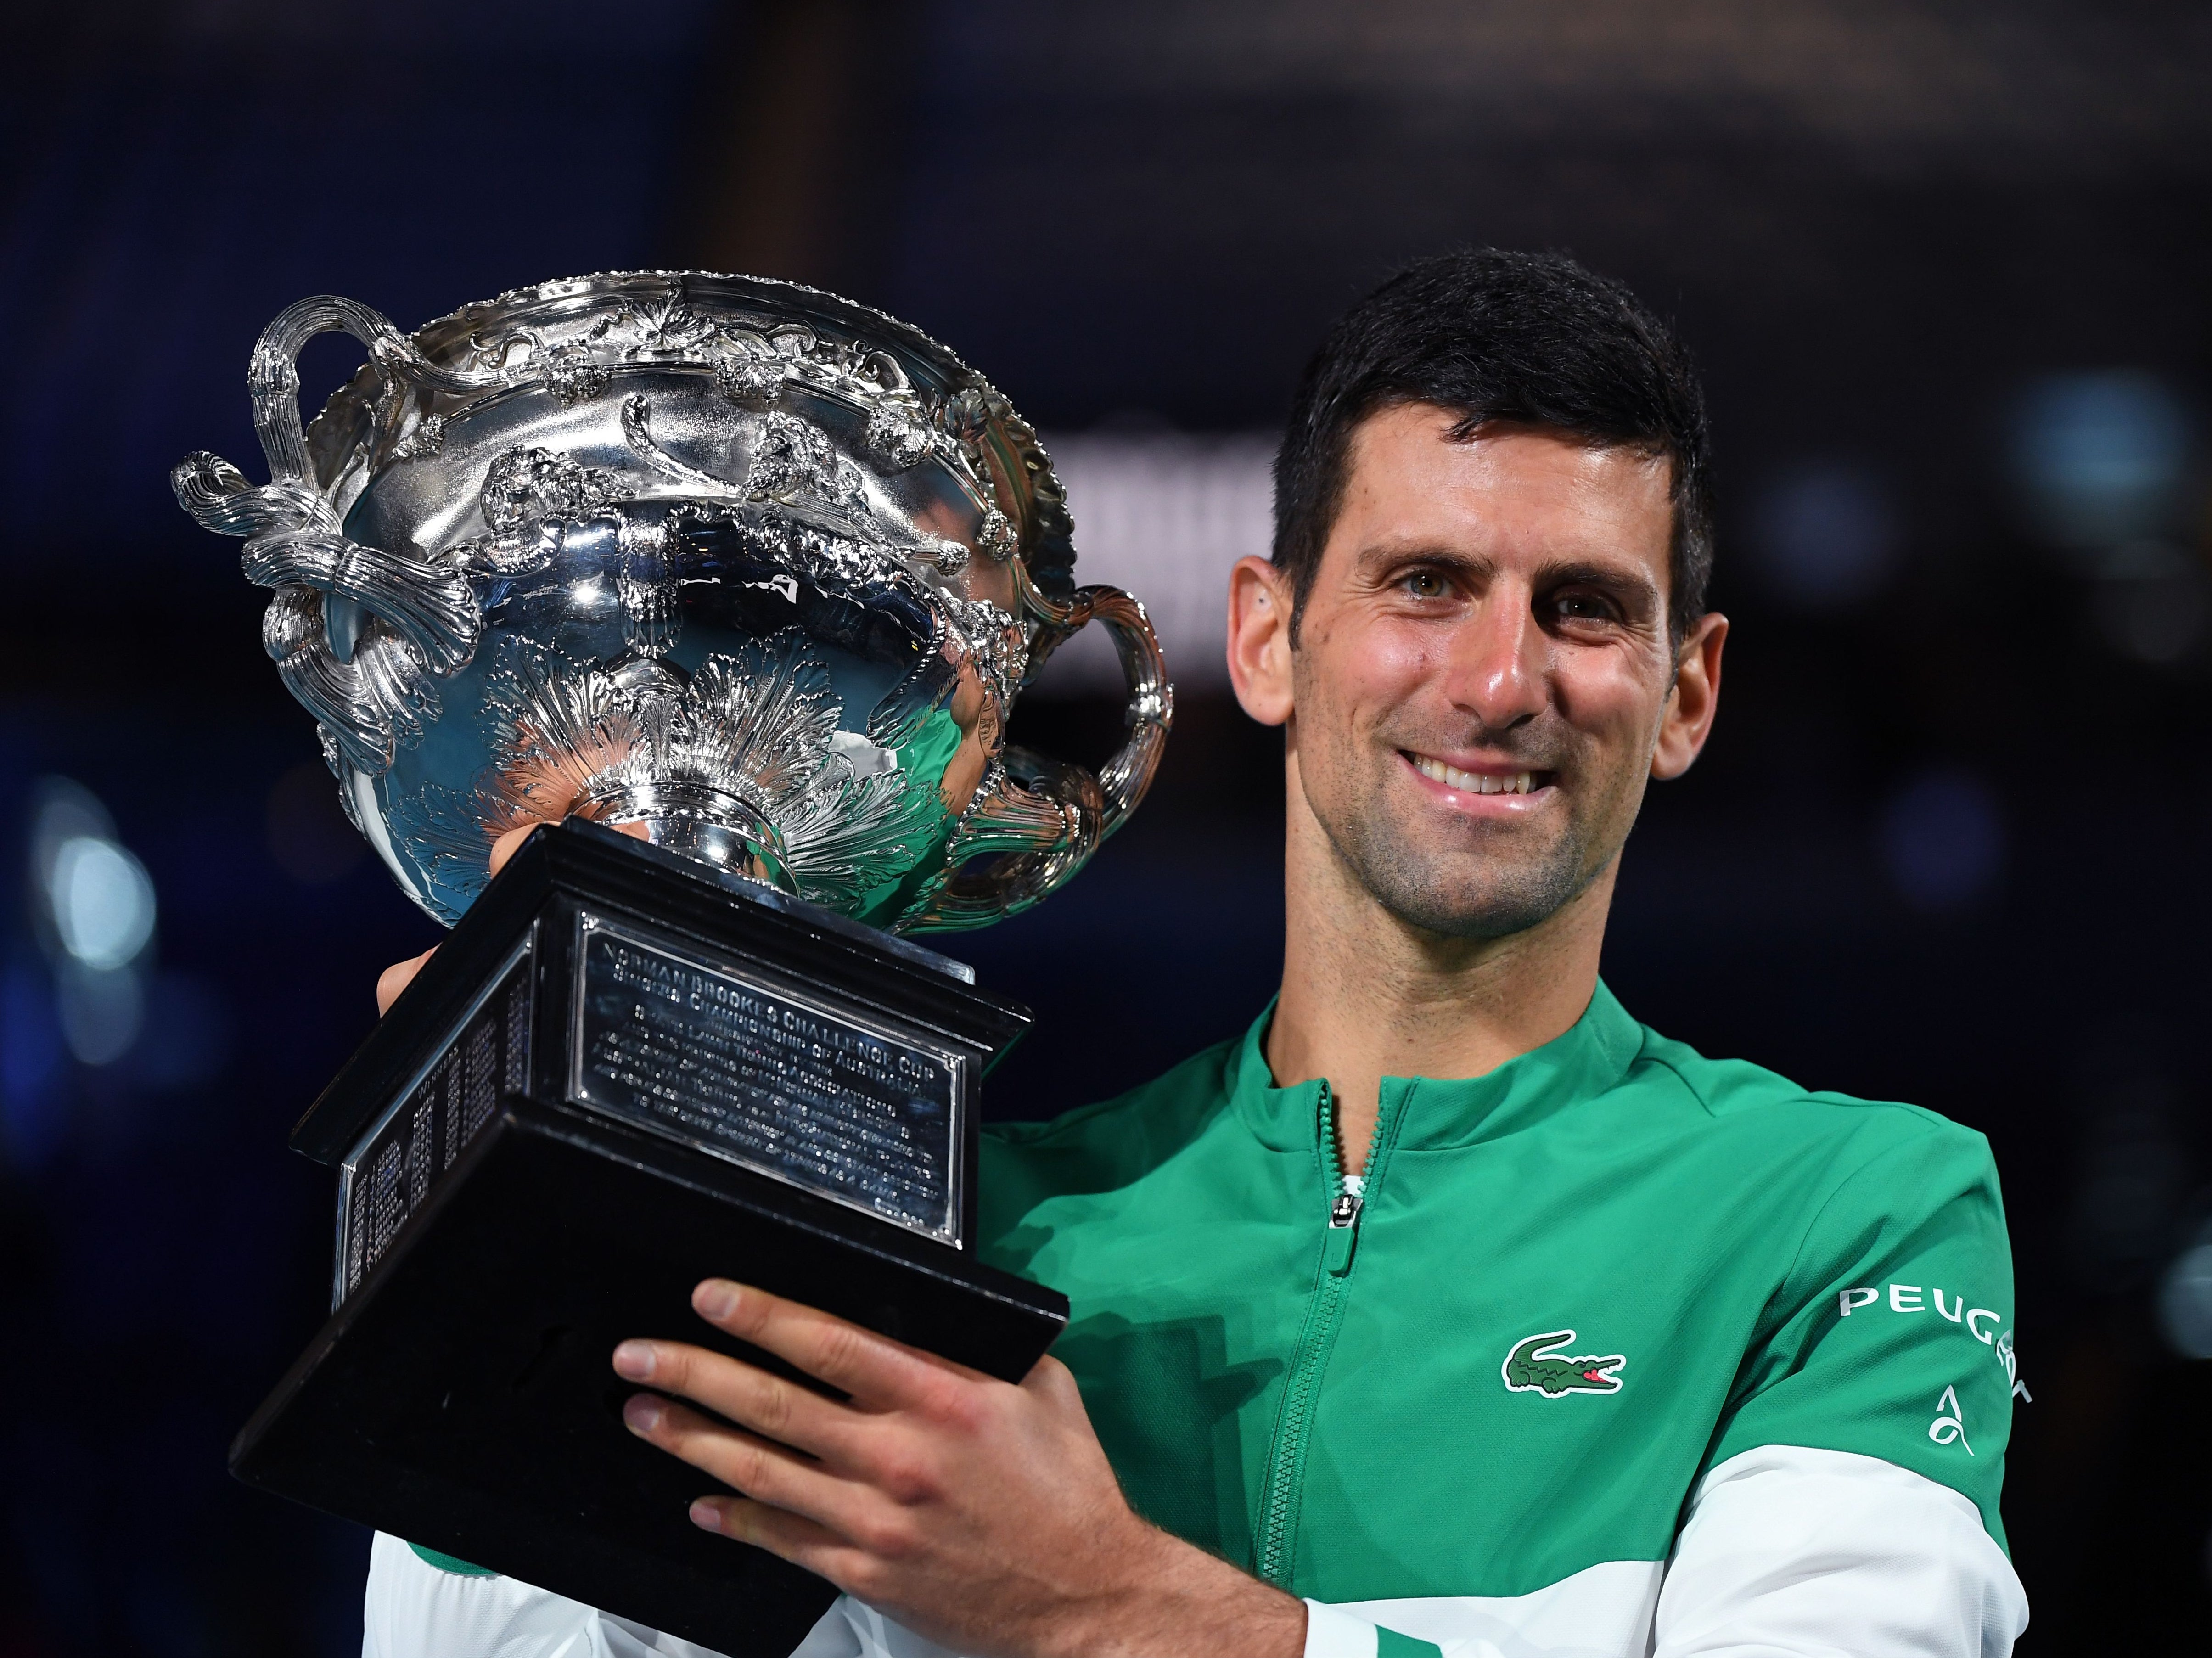 Djokovic was unable to defend his 2021 title